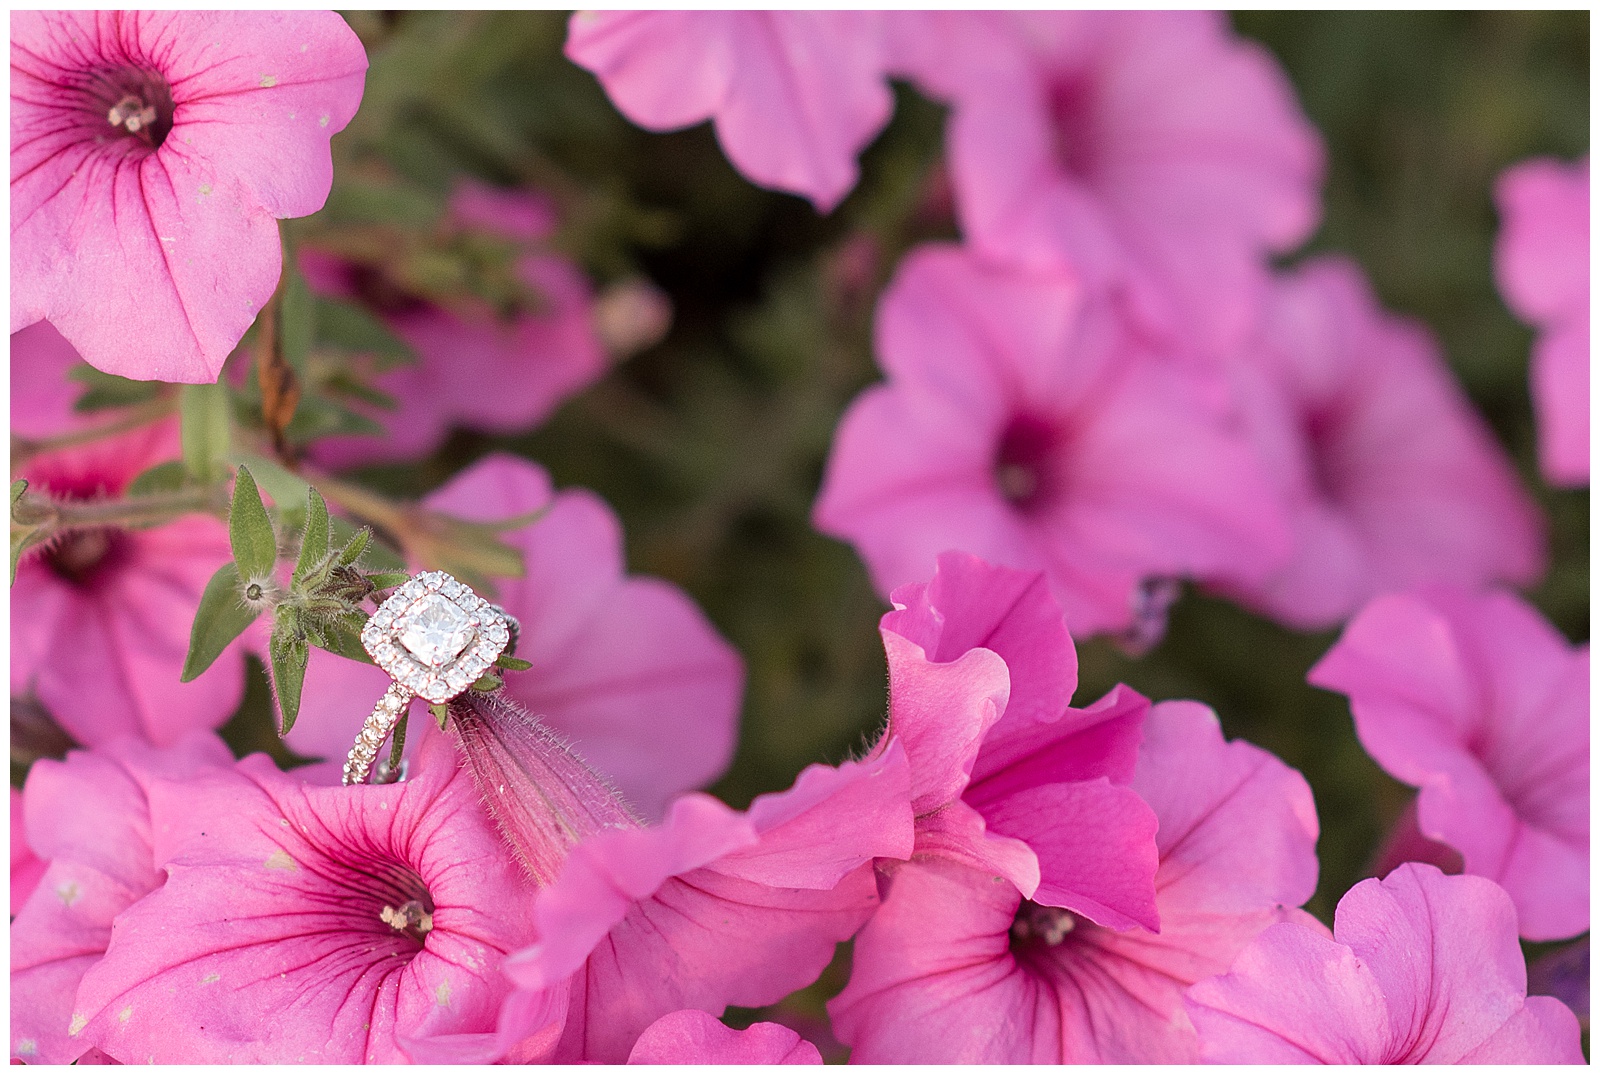 engagement ring on a patch of pinkflowers